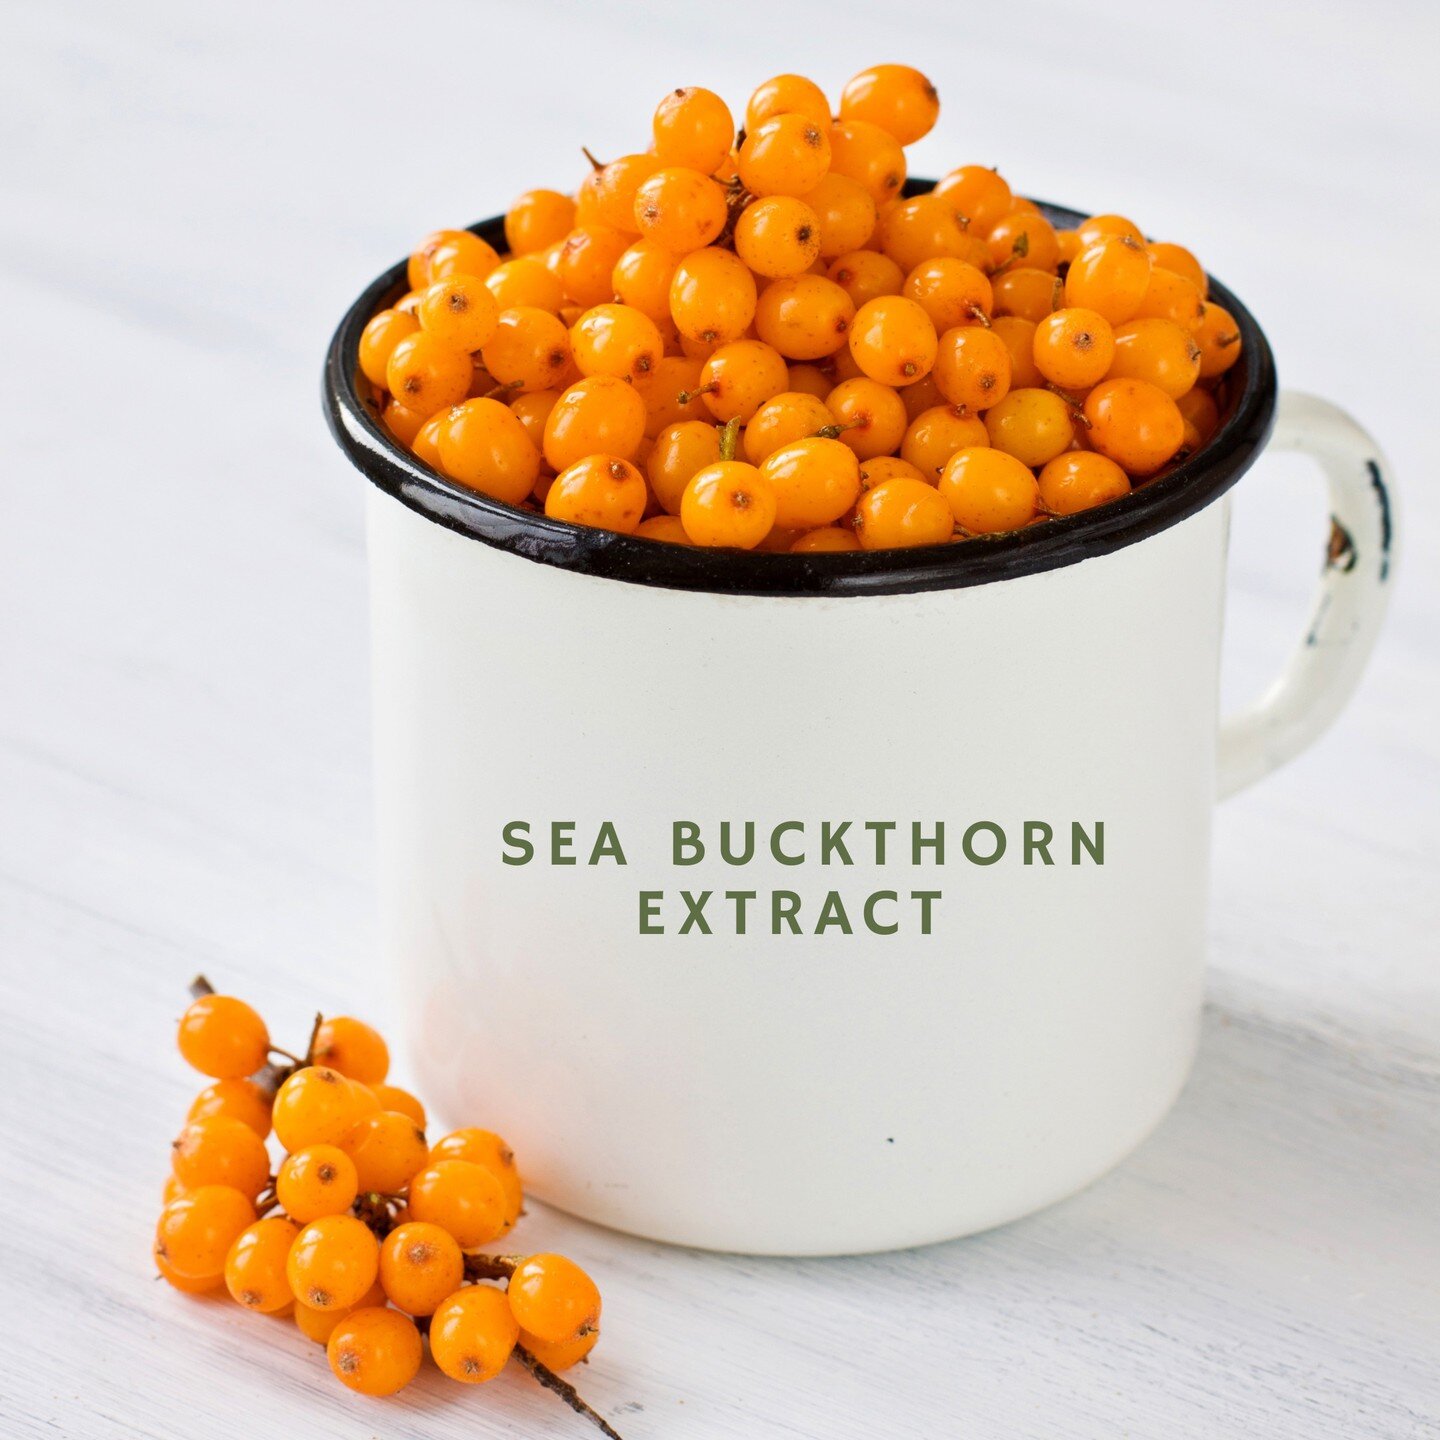 Sea buckthorn oil is excellent for reducing acne breakouts because it signals the oil glands to stop creating excess amounts of sebum. Sea buckthorn will reduce inflammation in the skin, prevent future flare-ups, help to fade scars, and promote an ov